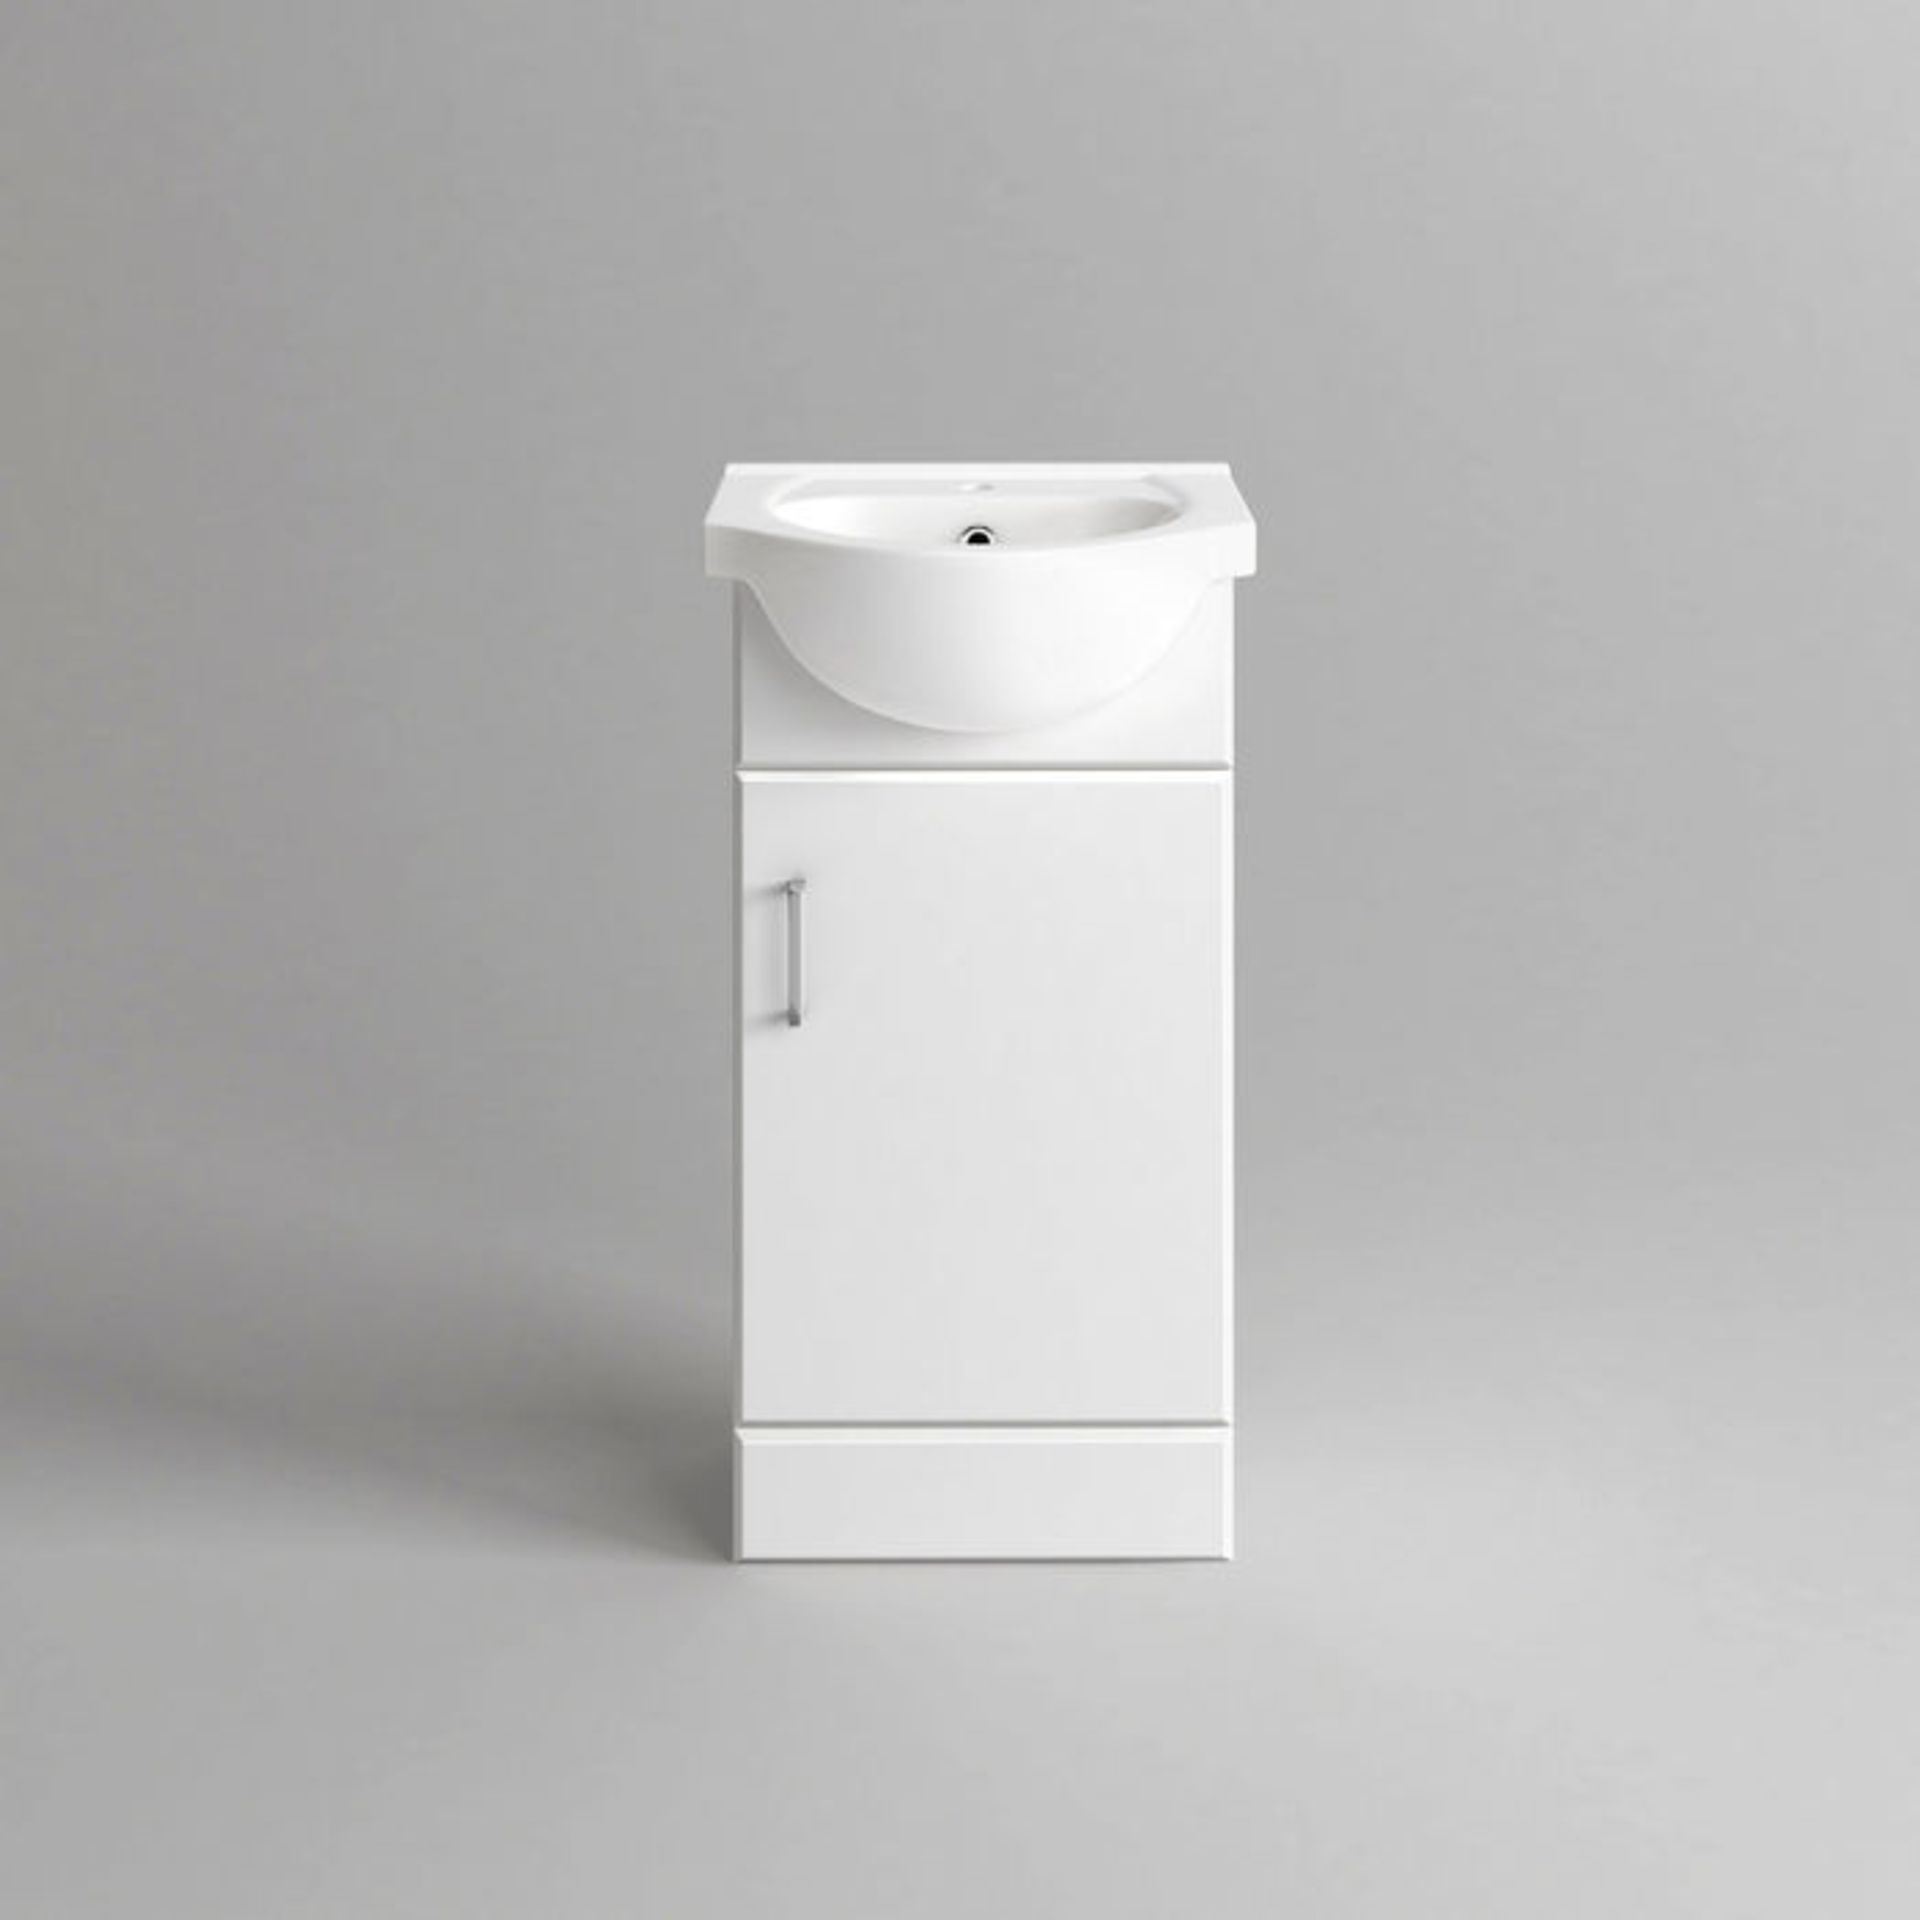 (VN31) 410mm Quartz Gloss White Built In Basin Cabinet. RRP £199.99. Comes complete with basin. - Image 5 of 5